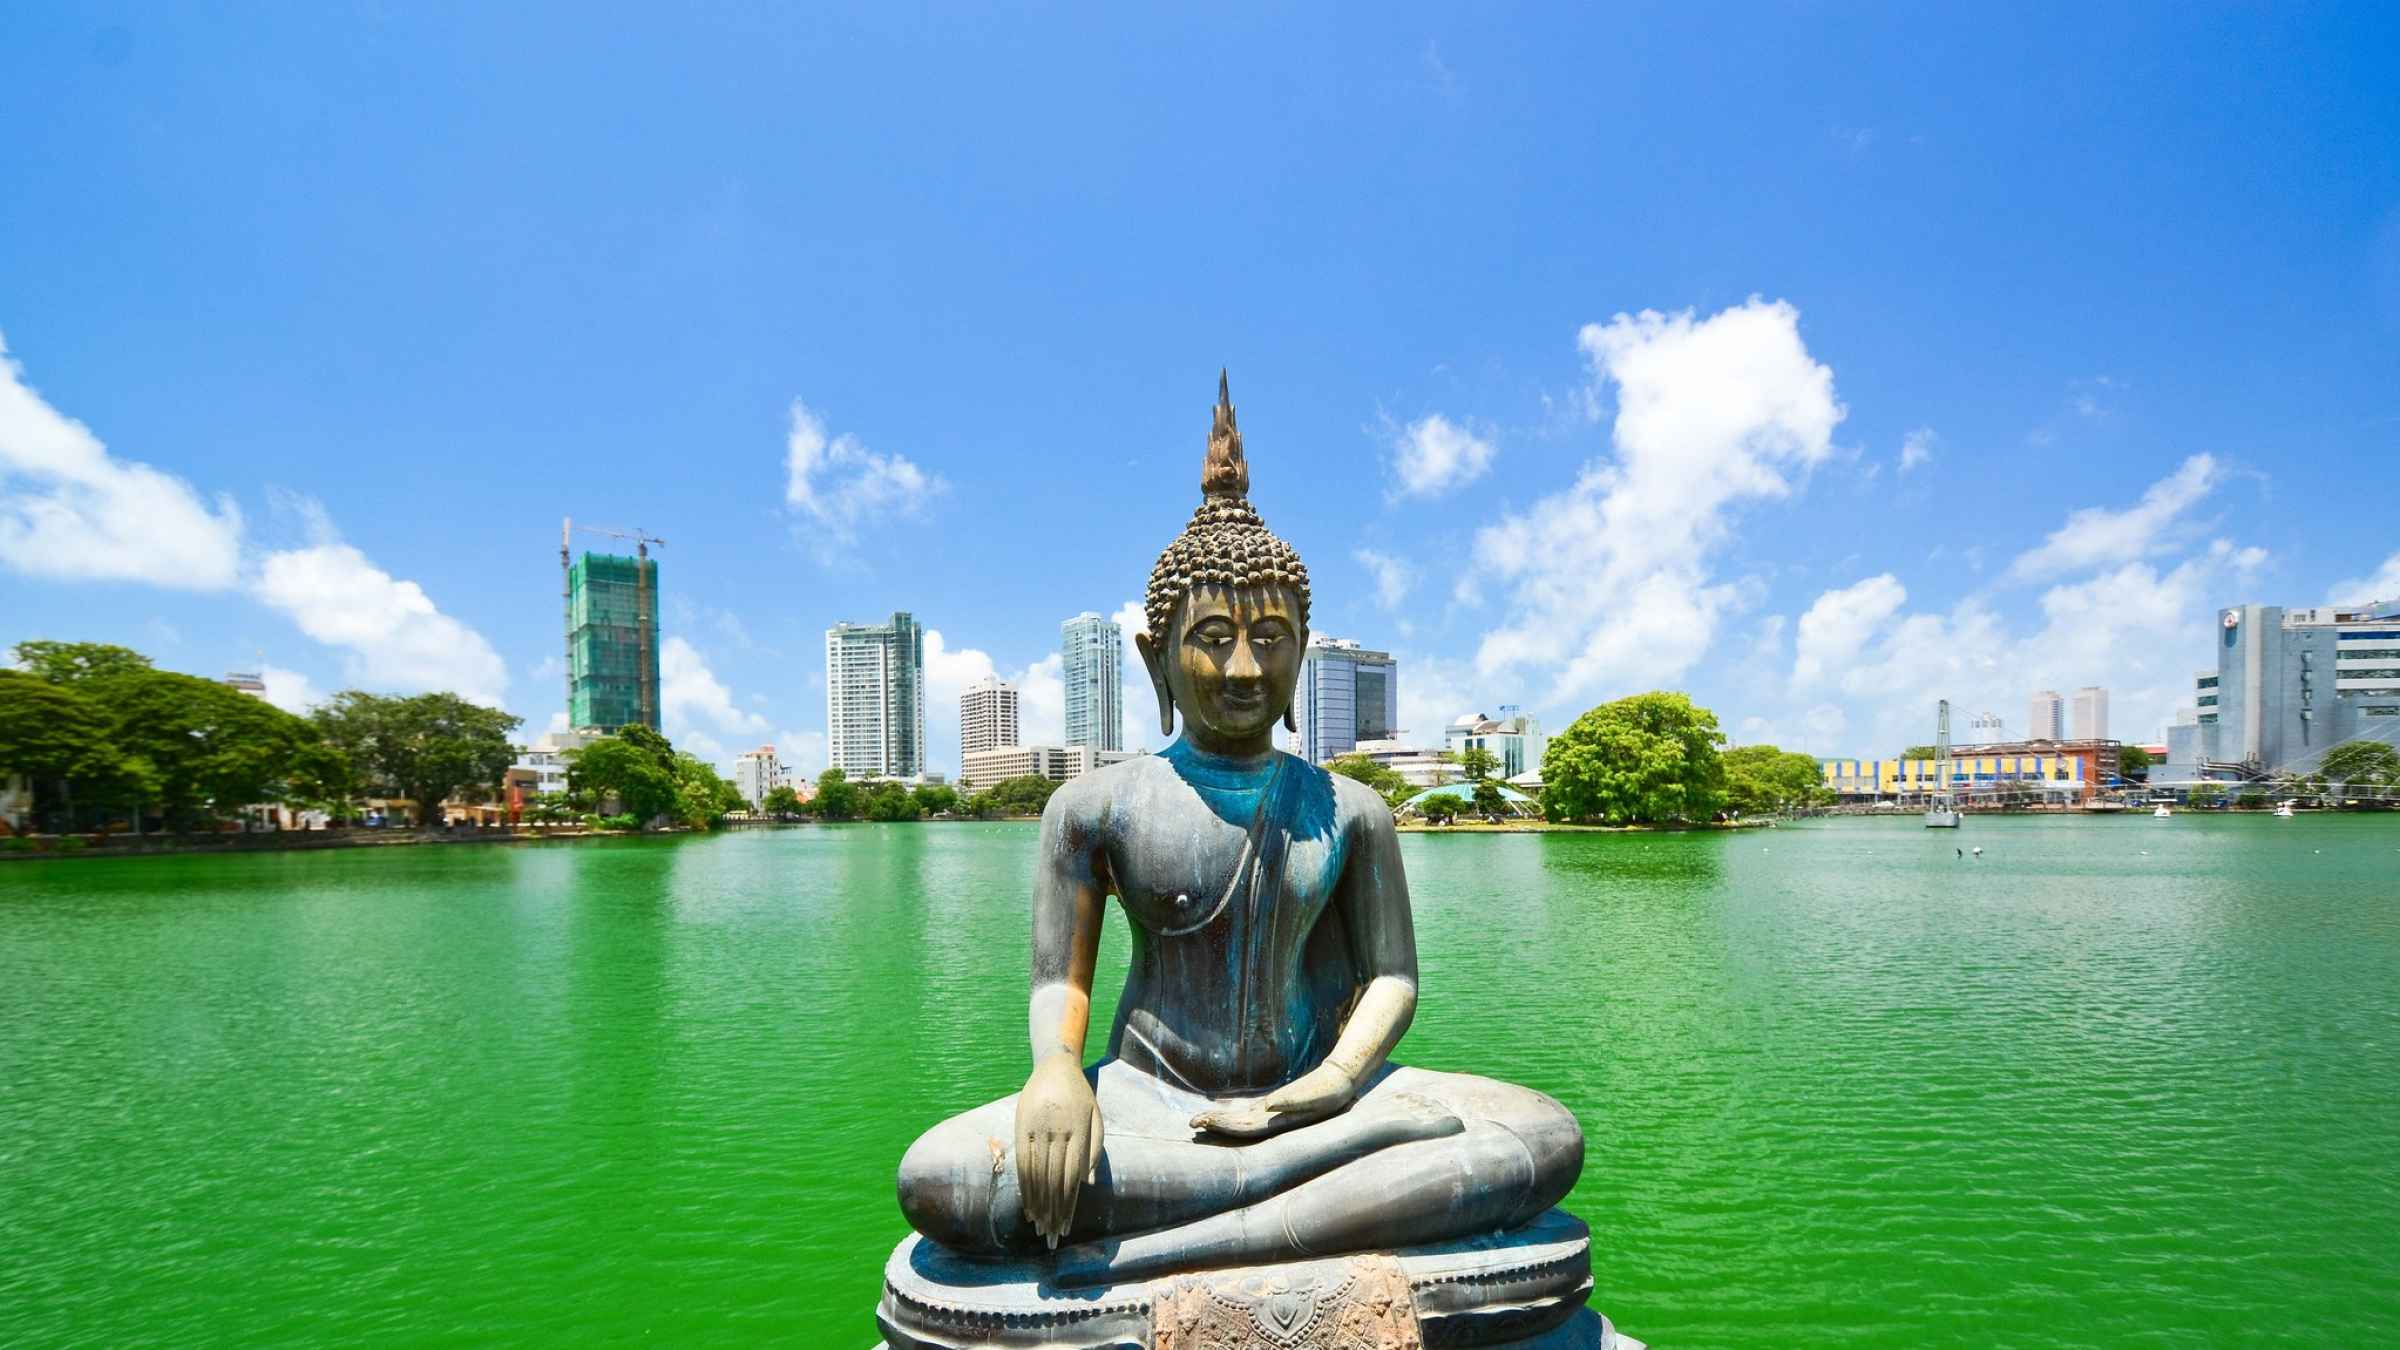 Colombo 21 Top 10 Tours Activities With Photos Things To Do In Colombo Sri Lanka Getyourguide